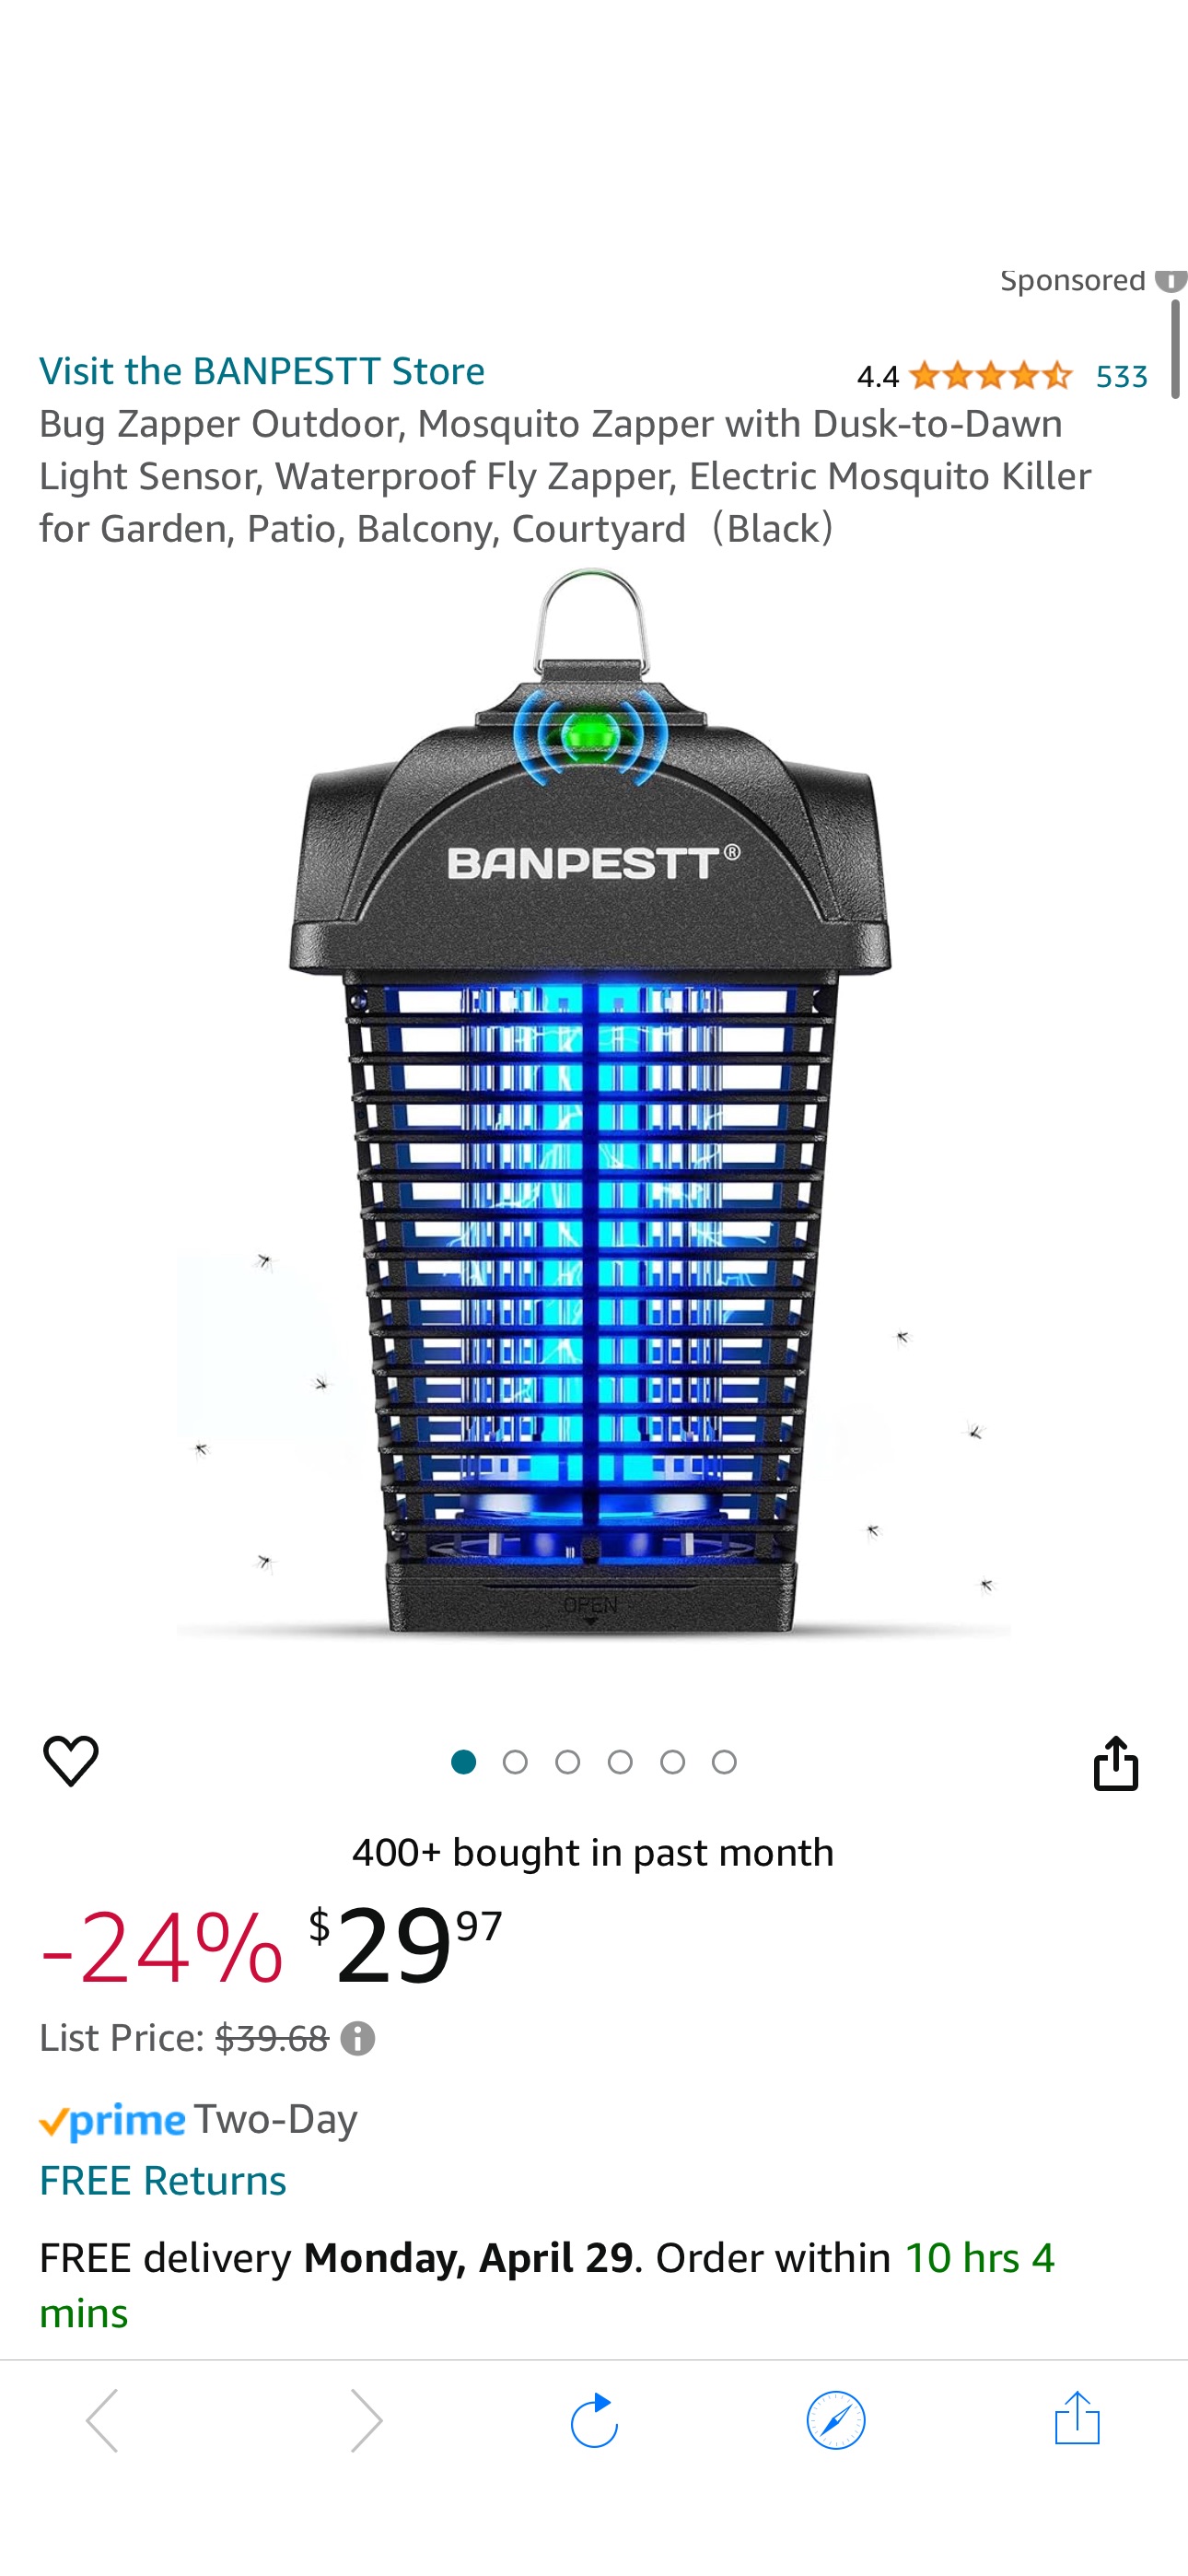 Amazon.com : BANPESTT Bug Zapper Outdoor, Mosquito Zapper with Dusk-to-Dawn Light Sensor, Waterproof Fly Zapper, Electric Mosquito Killer 14.98 after code 503O2OVQ